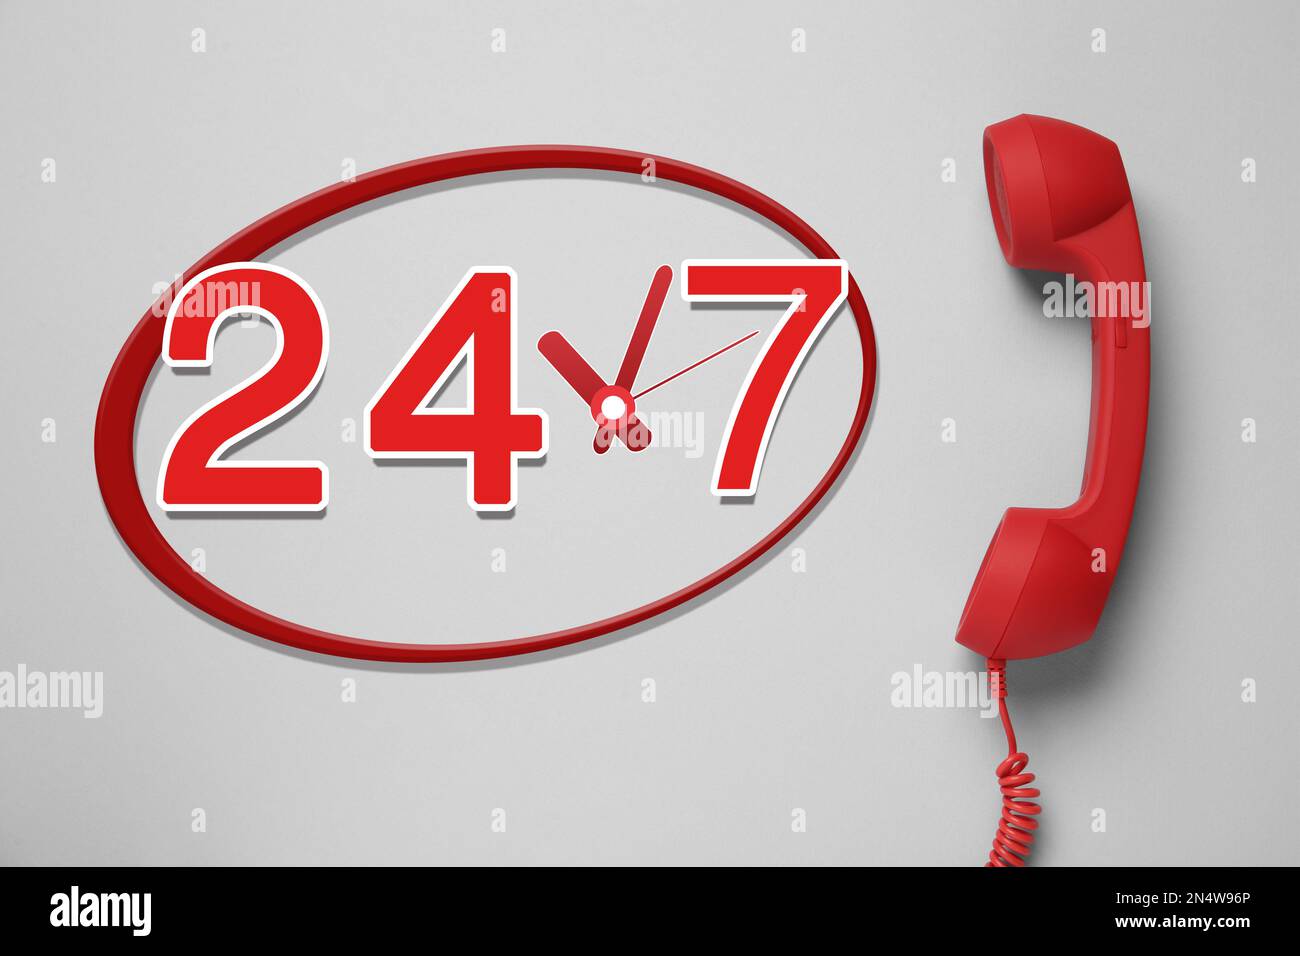 24/7 hotline service. Red handset on light grey background, top view Stock Photo